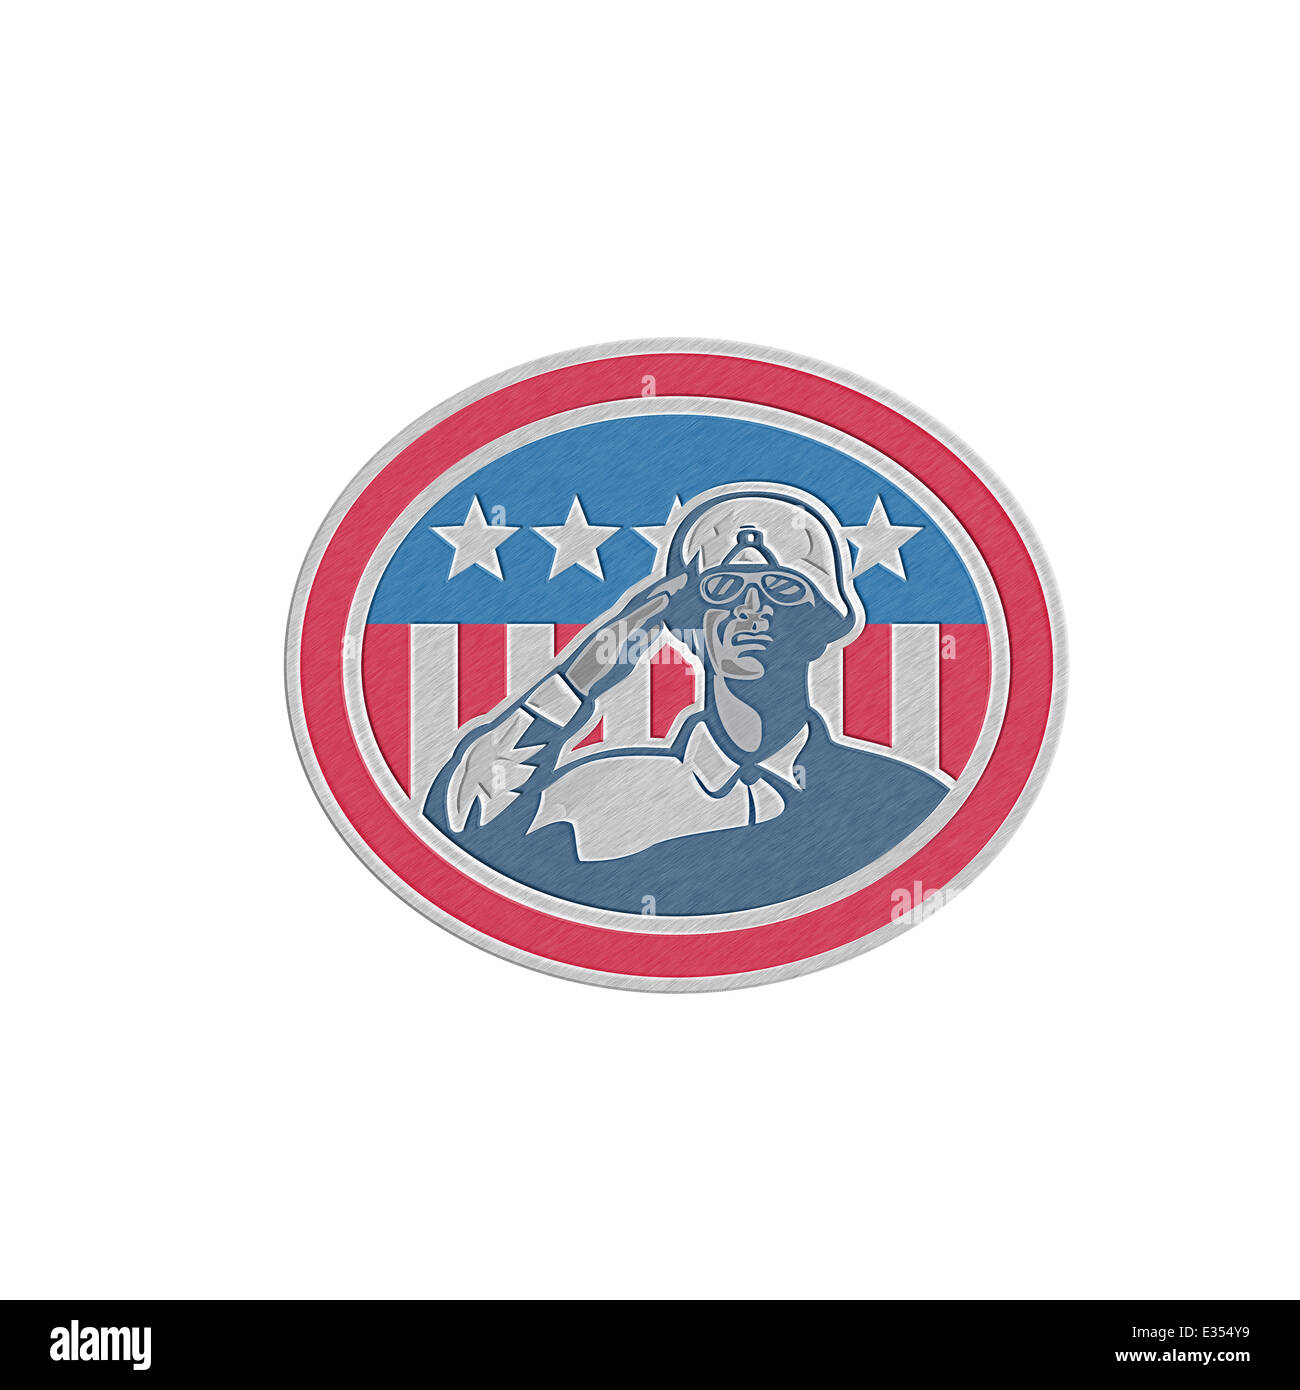 Metallic styled illustration of an african-american soldier serviceman saluting with USA stars and stripes flag in background set inside oval done in retro style. Stock Photo